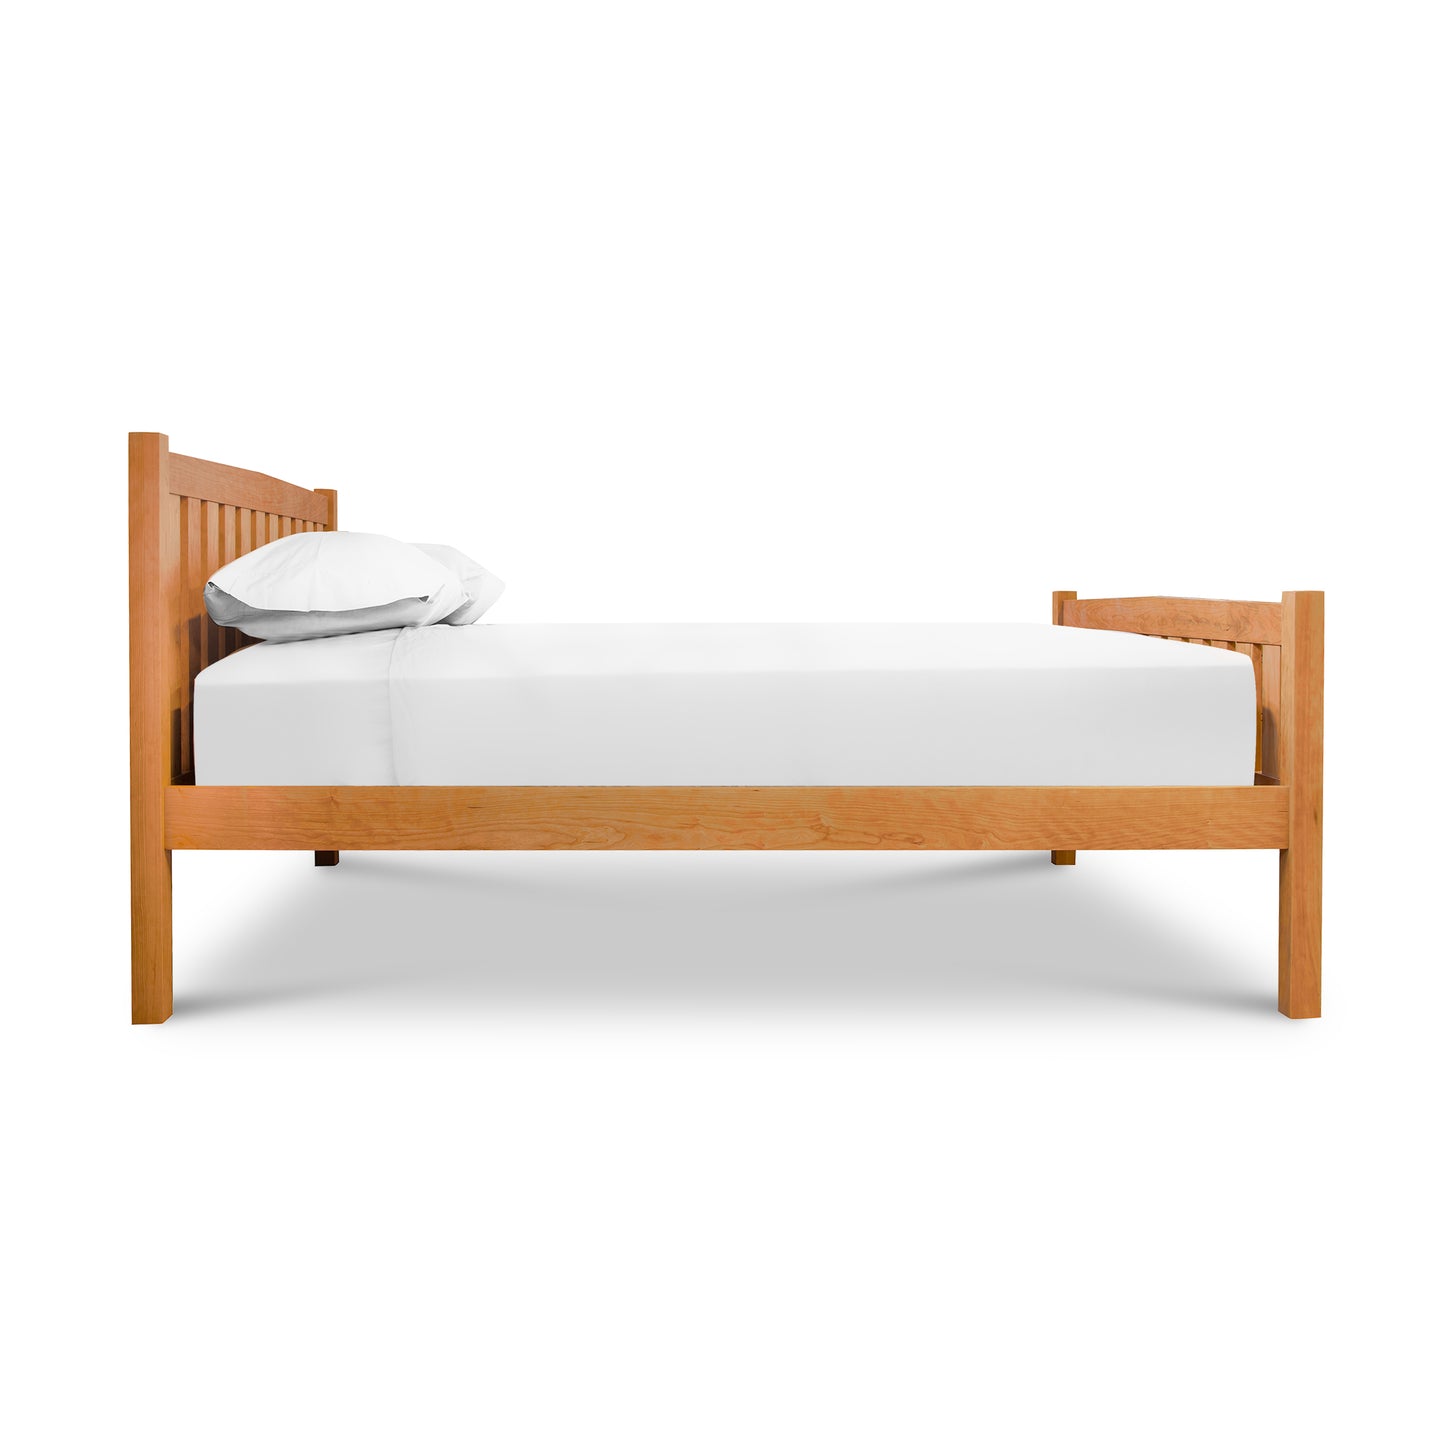 A single Bennington Bed with High Footboard in cherry wood with a white mattress and a pillow against a white background. (Brand: Vermont Furniture Designs)